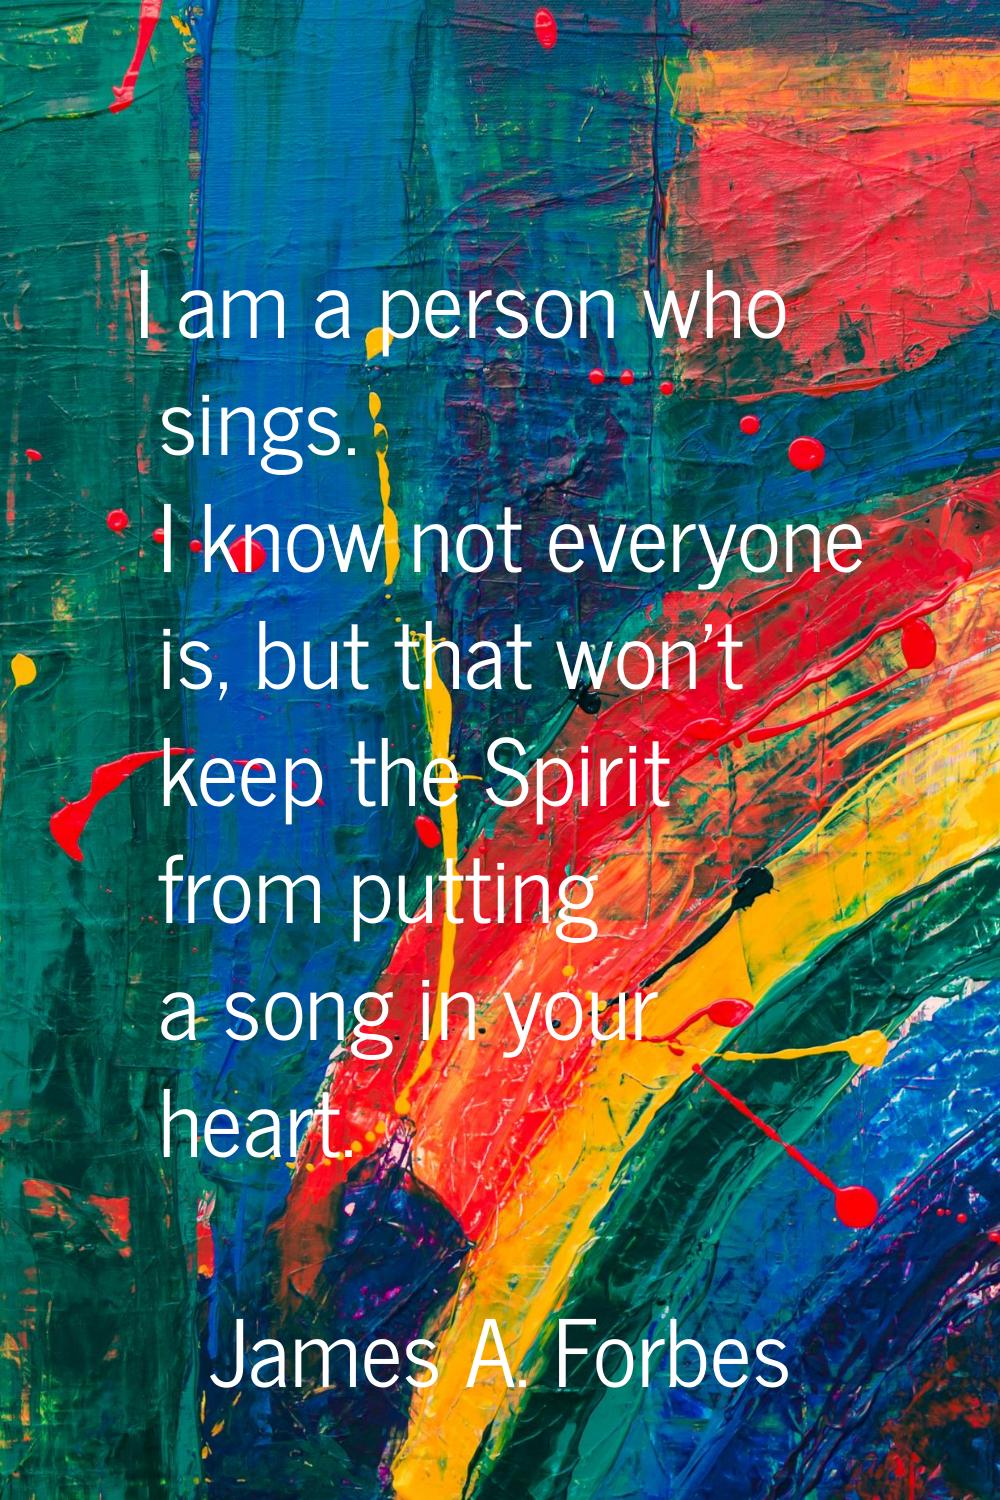 I am a person who sings. I know not everyone is, but that won't keep the Spirit from putting a song